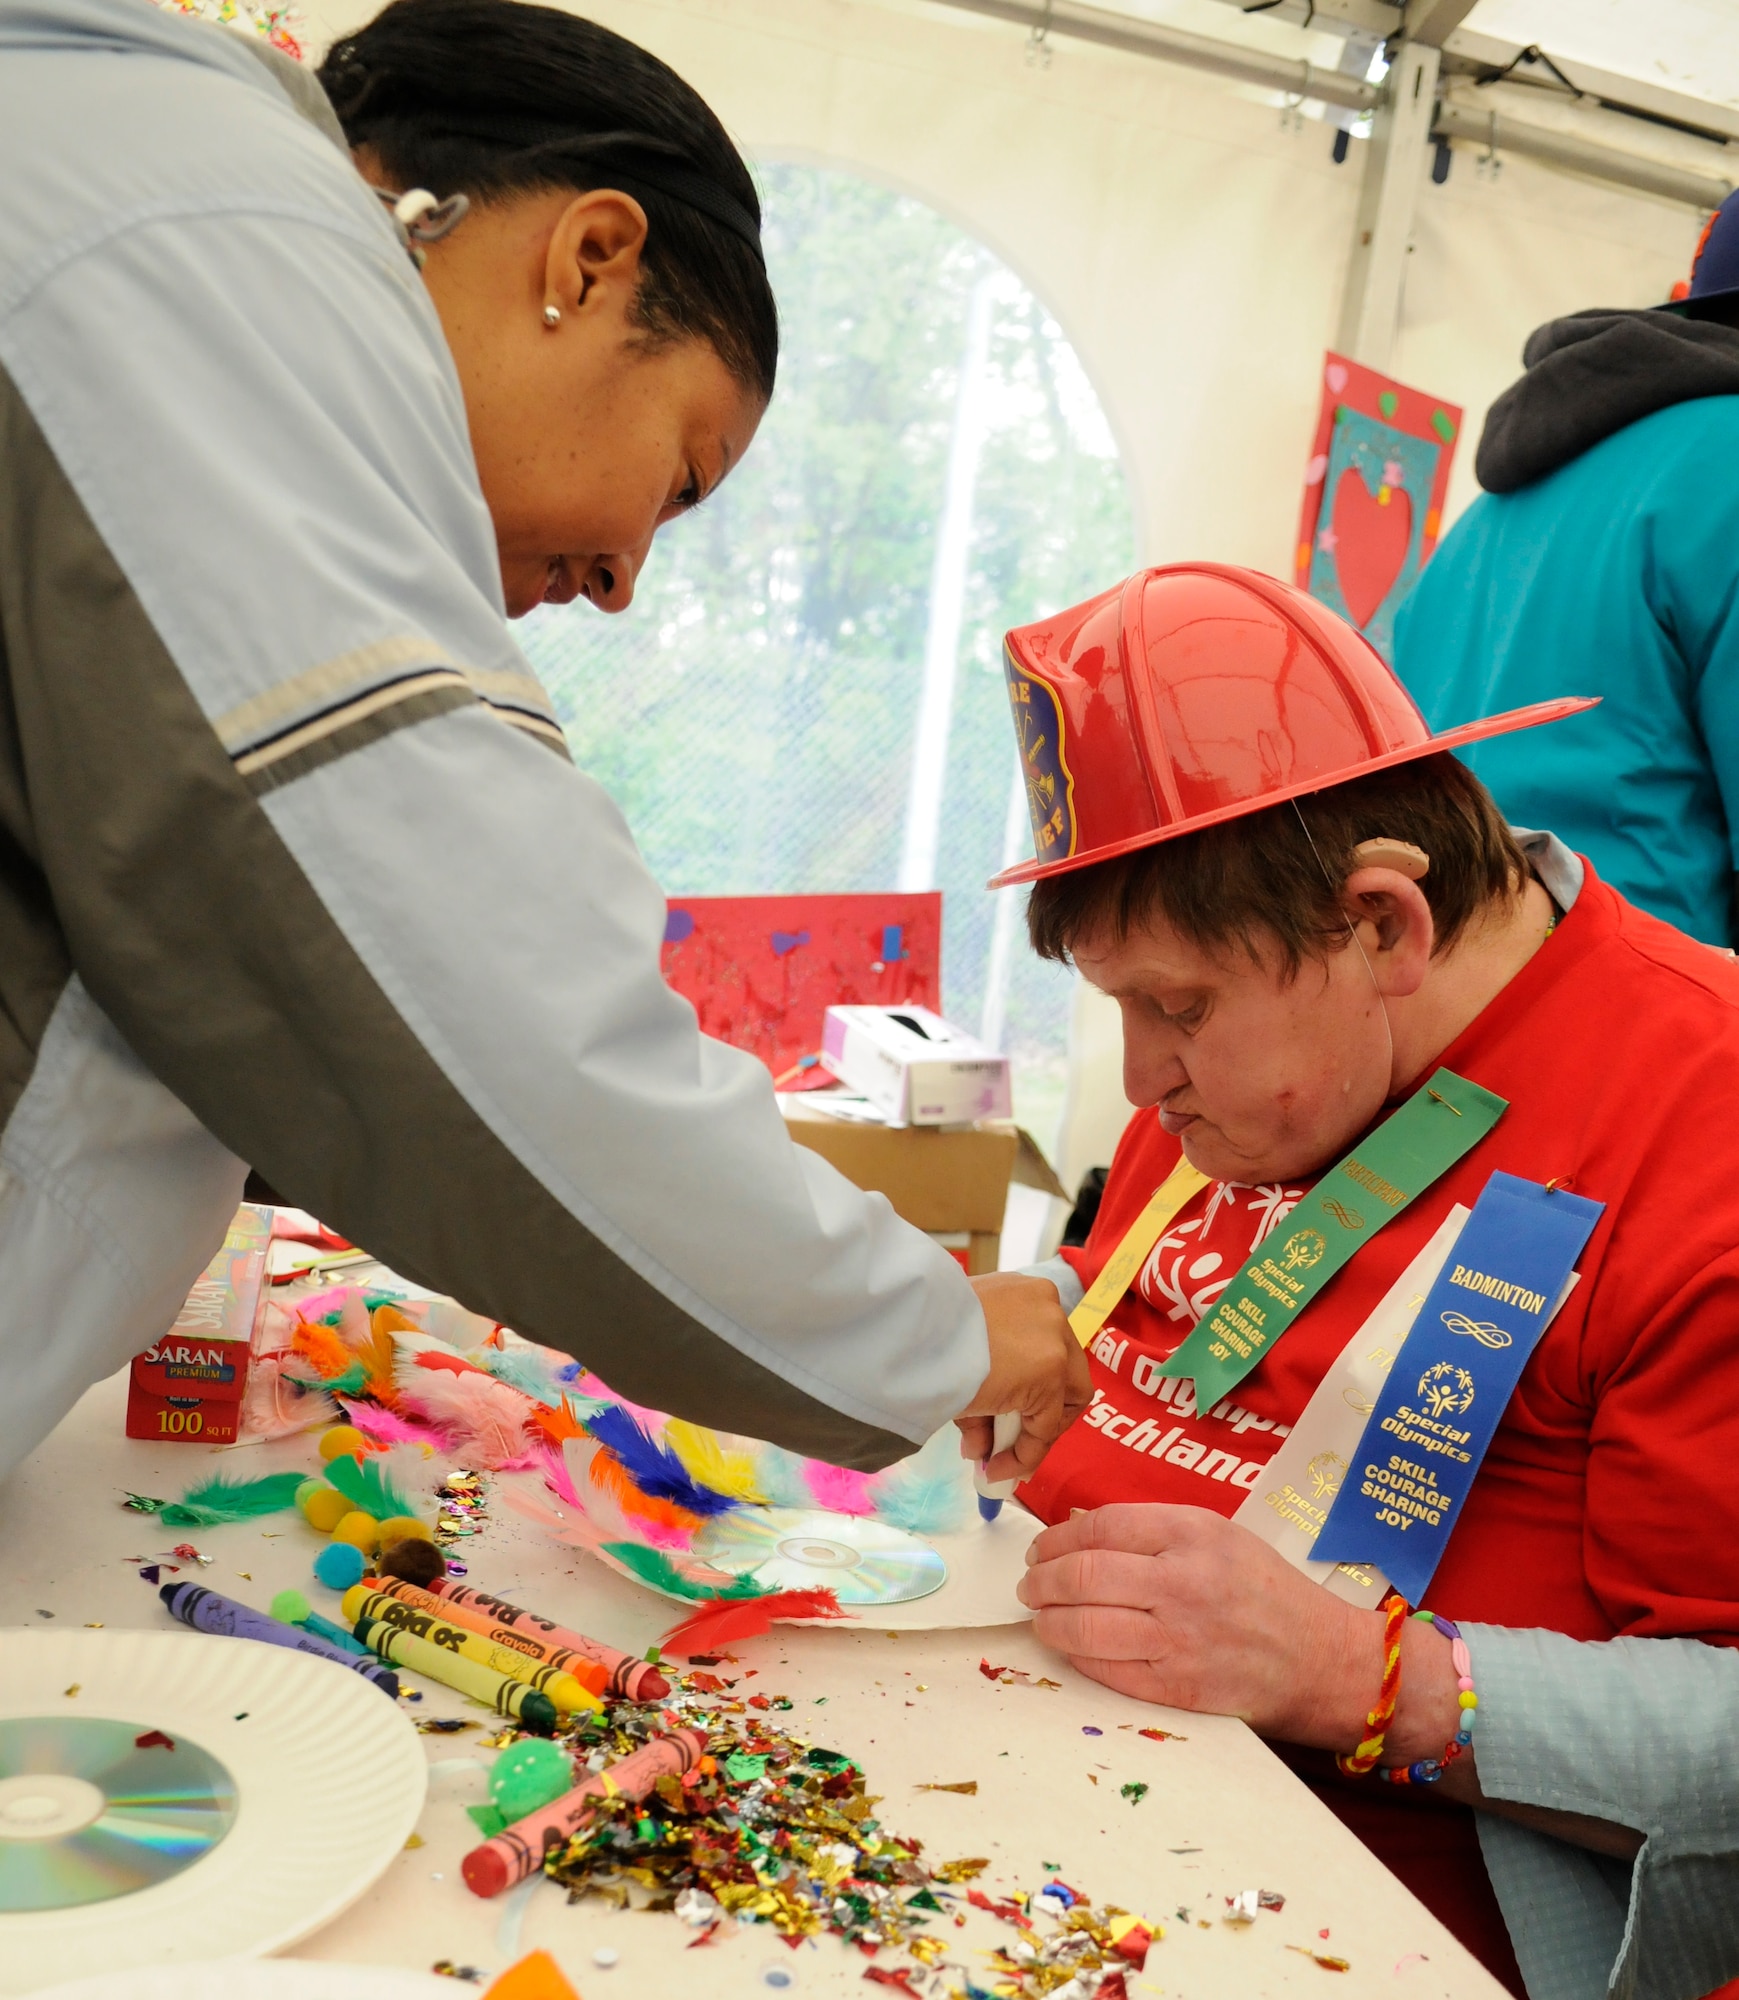 Tammie Honore, Ramstein Middle School teacher, assist an athlete in an arts and crafts section during the Special Olympics, Enkenbach-Alsenborn, Germany, May 12, 2010. Special Olympics is a worldwide event for children and adults with disabilities to build confidence and foster friendship. The Kaiserslautern Military Community hosted its 27th Annual Special Olympics for over 800 athletes. (U.S. Air Force photo by Airman 1st Class Brittany Perry)